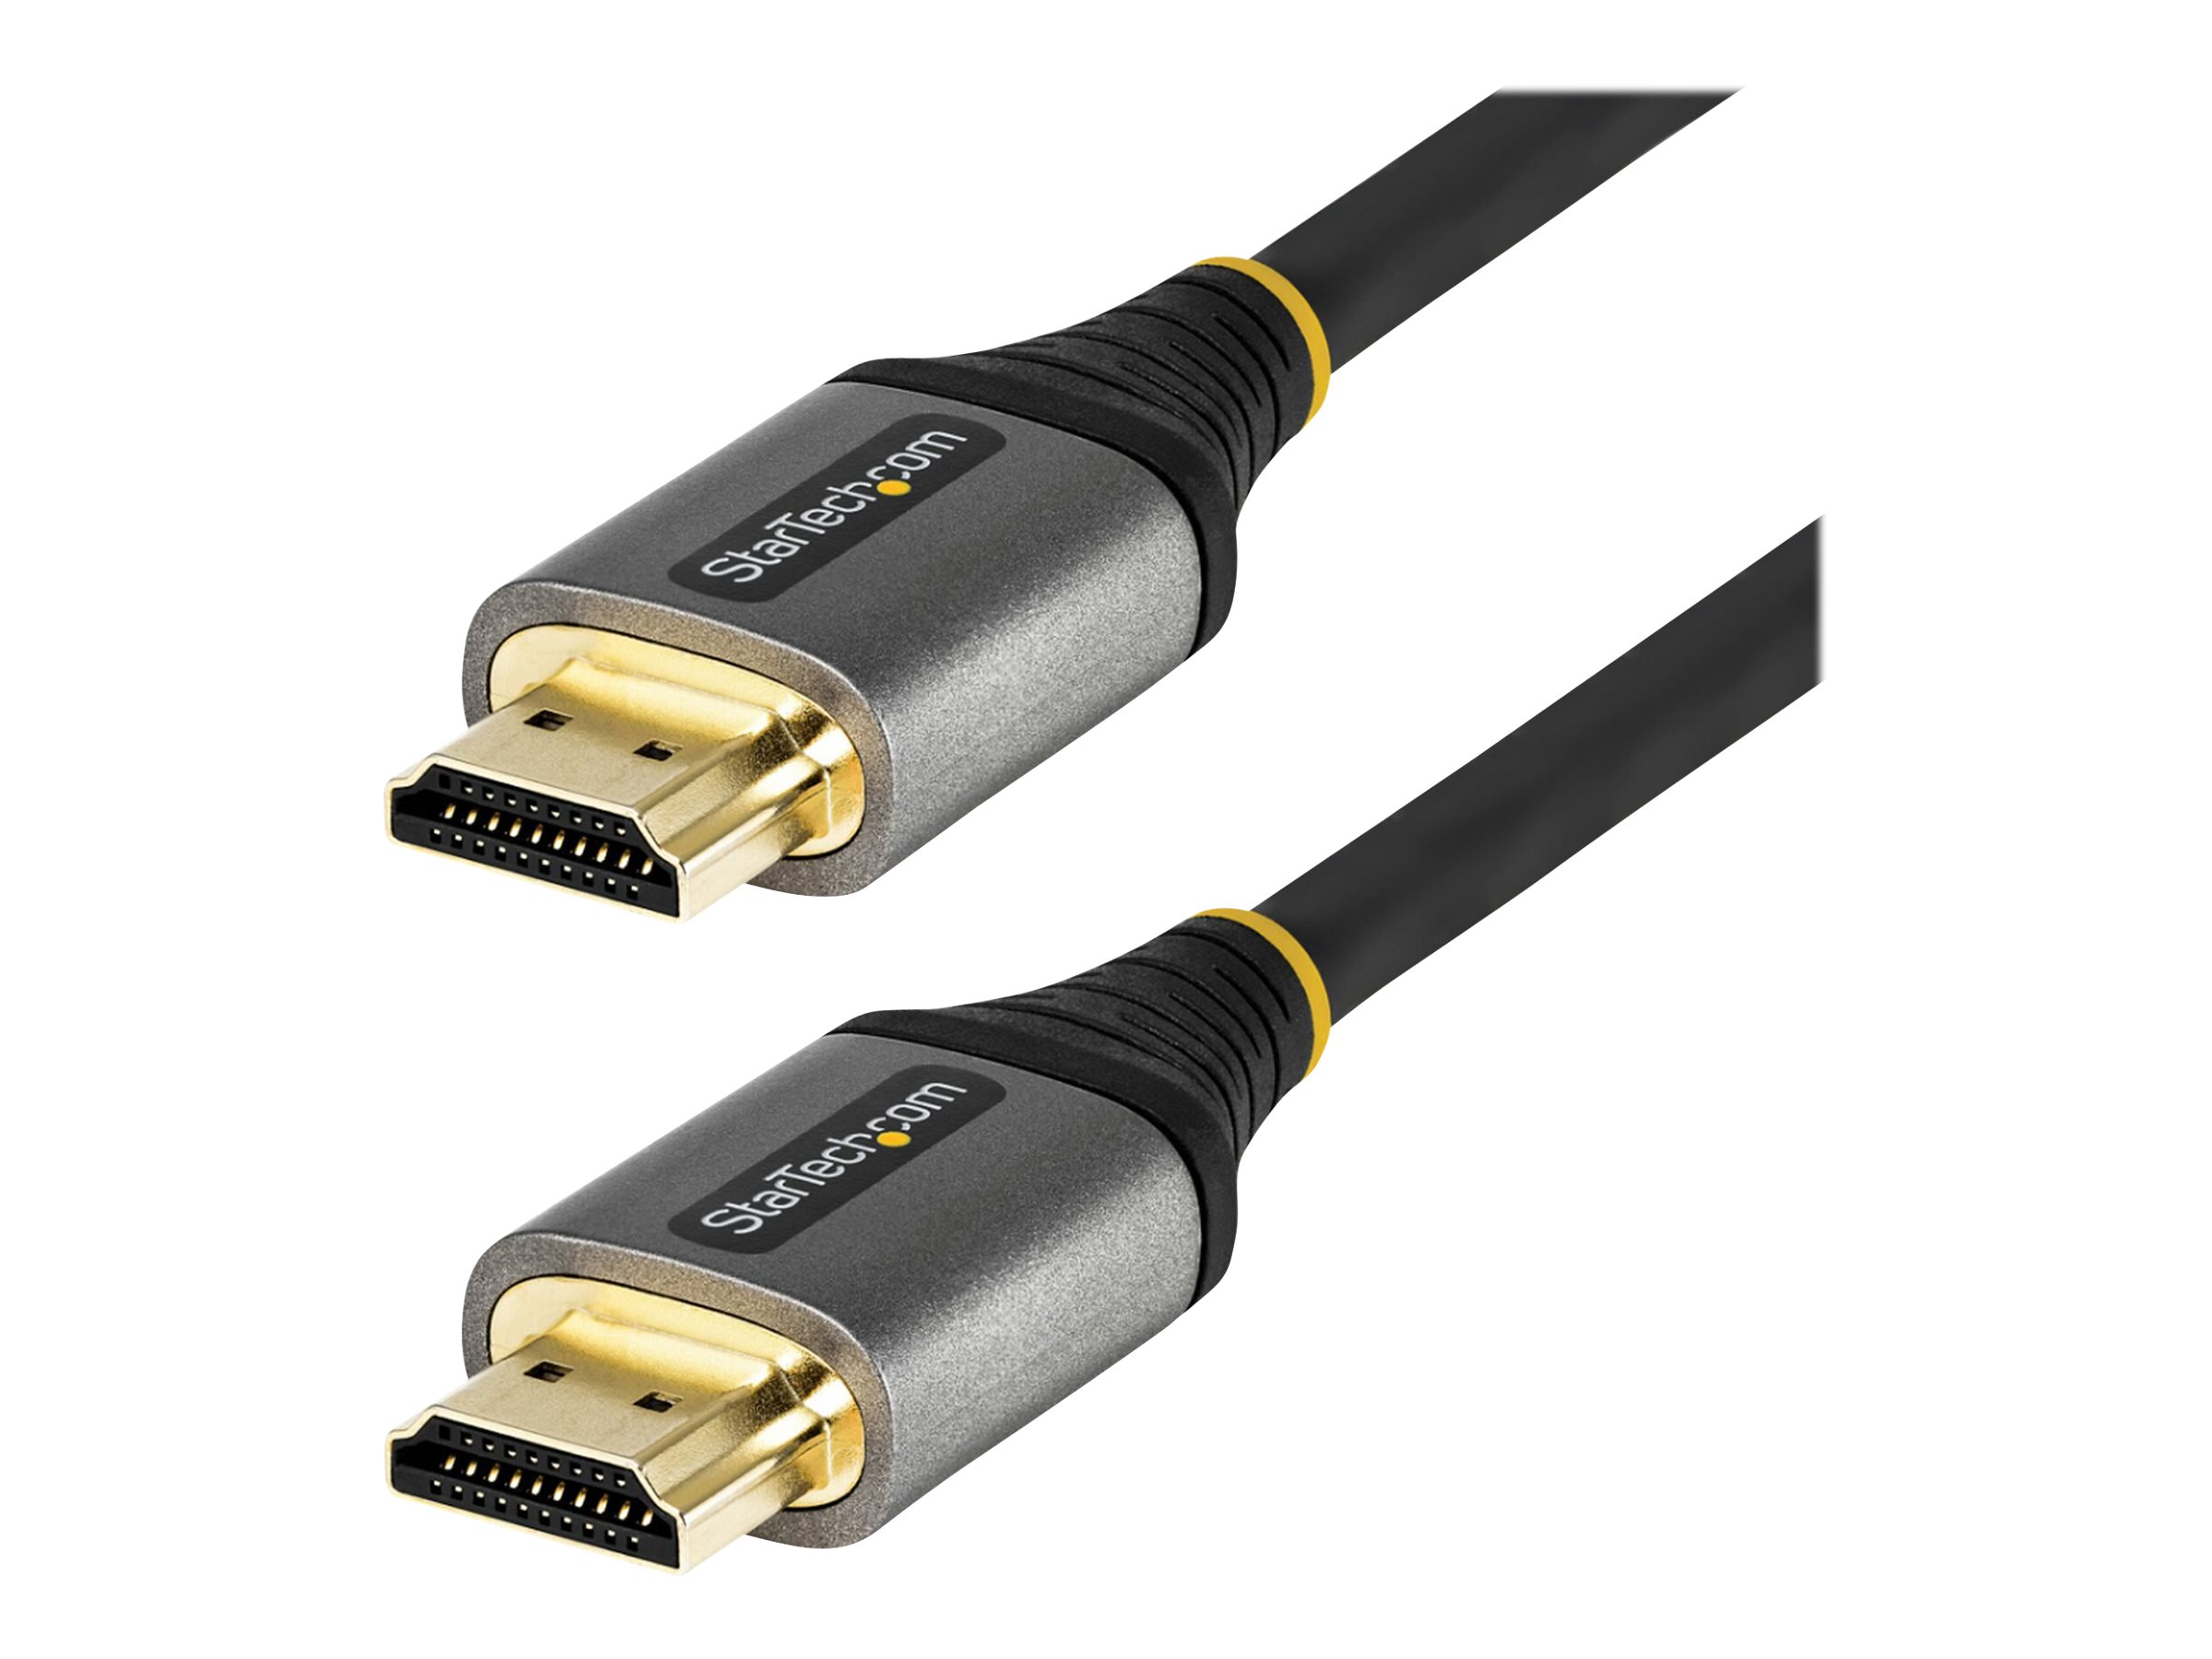 StarTech.com 16ft (5m) Premium Certified HDMI 2.0 Cable - High-Speed Ultra HD 4K 60Hz HDMI Cable with Ethernet - HDR10, ARC - UHD HDMI Video Cord - For UHD Monitors, TVs, Displays - M/M - Premium Highspeed - HDMI-Kabel mit Ethernet - HDMI männlich zu HDMI